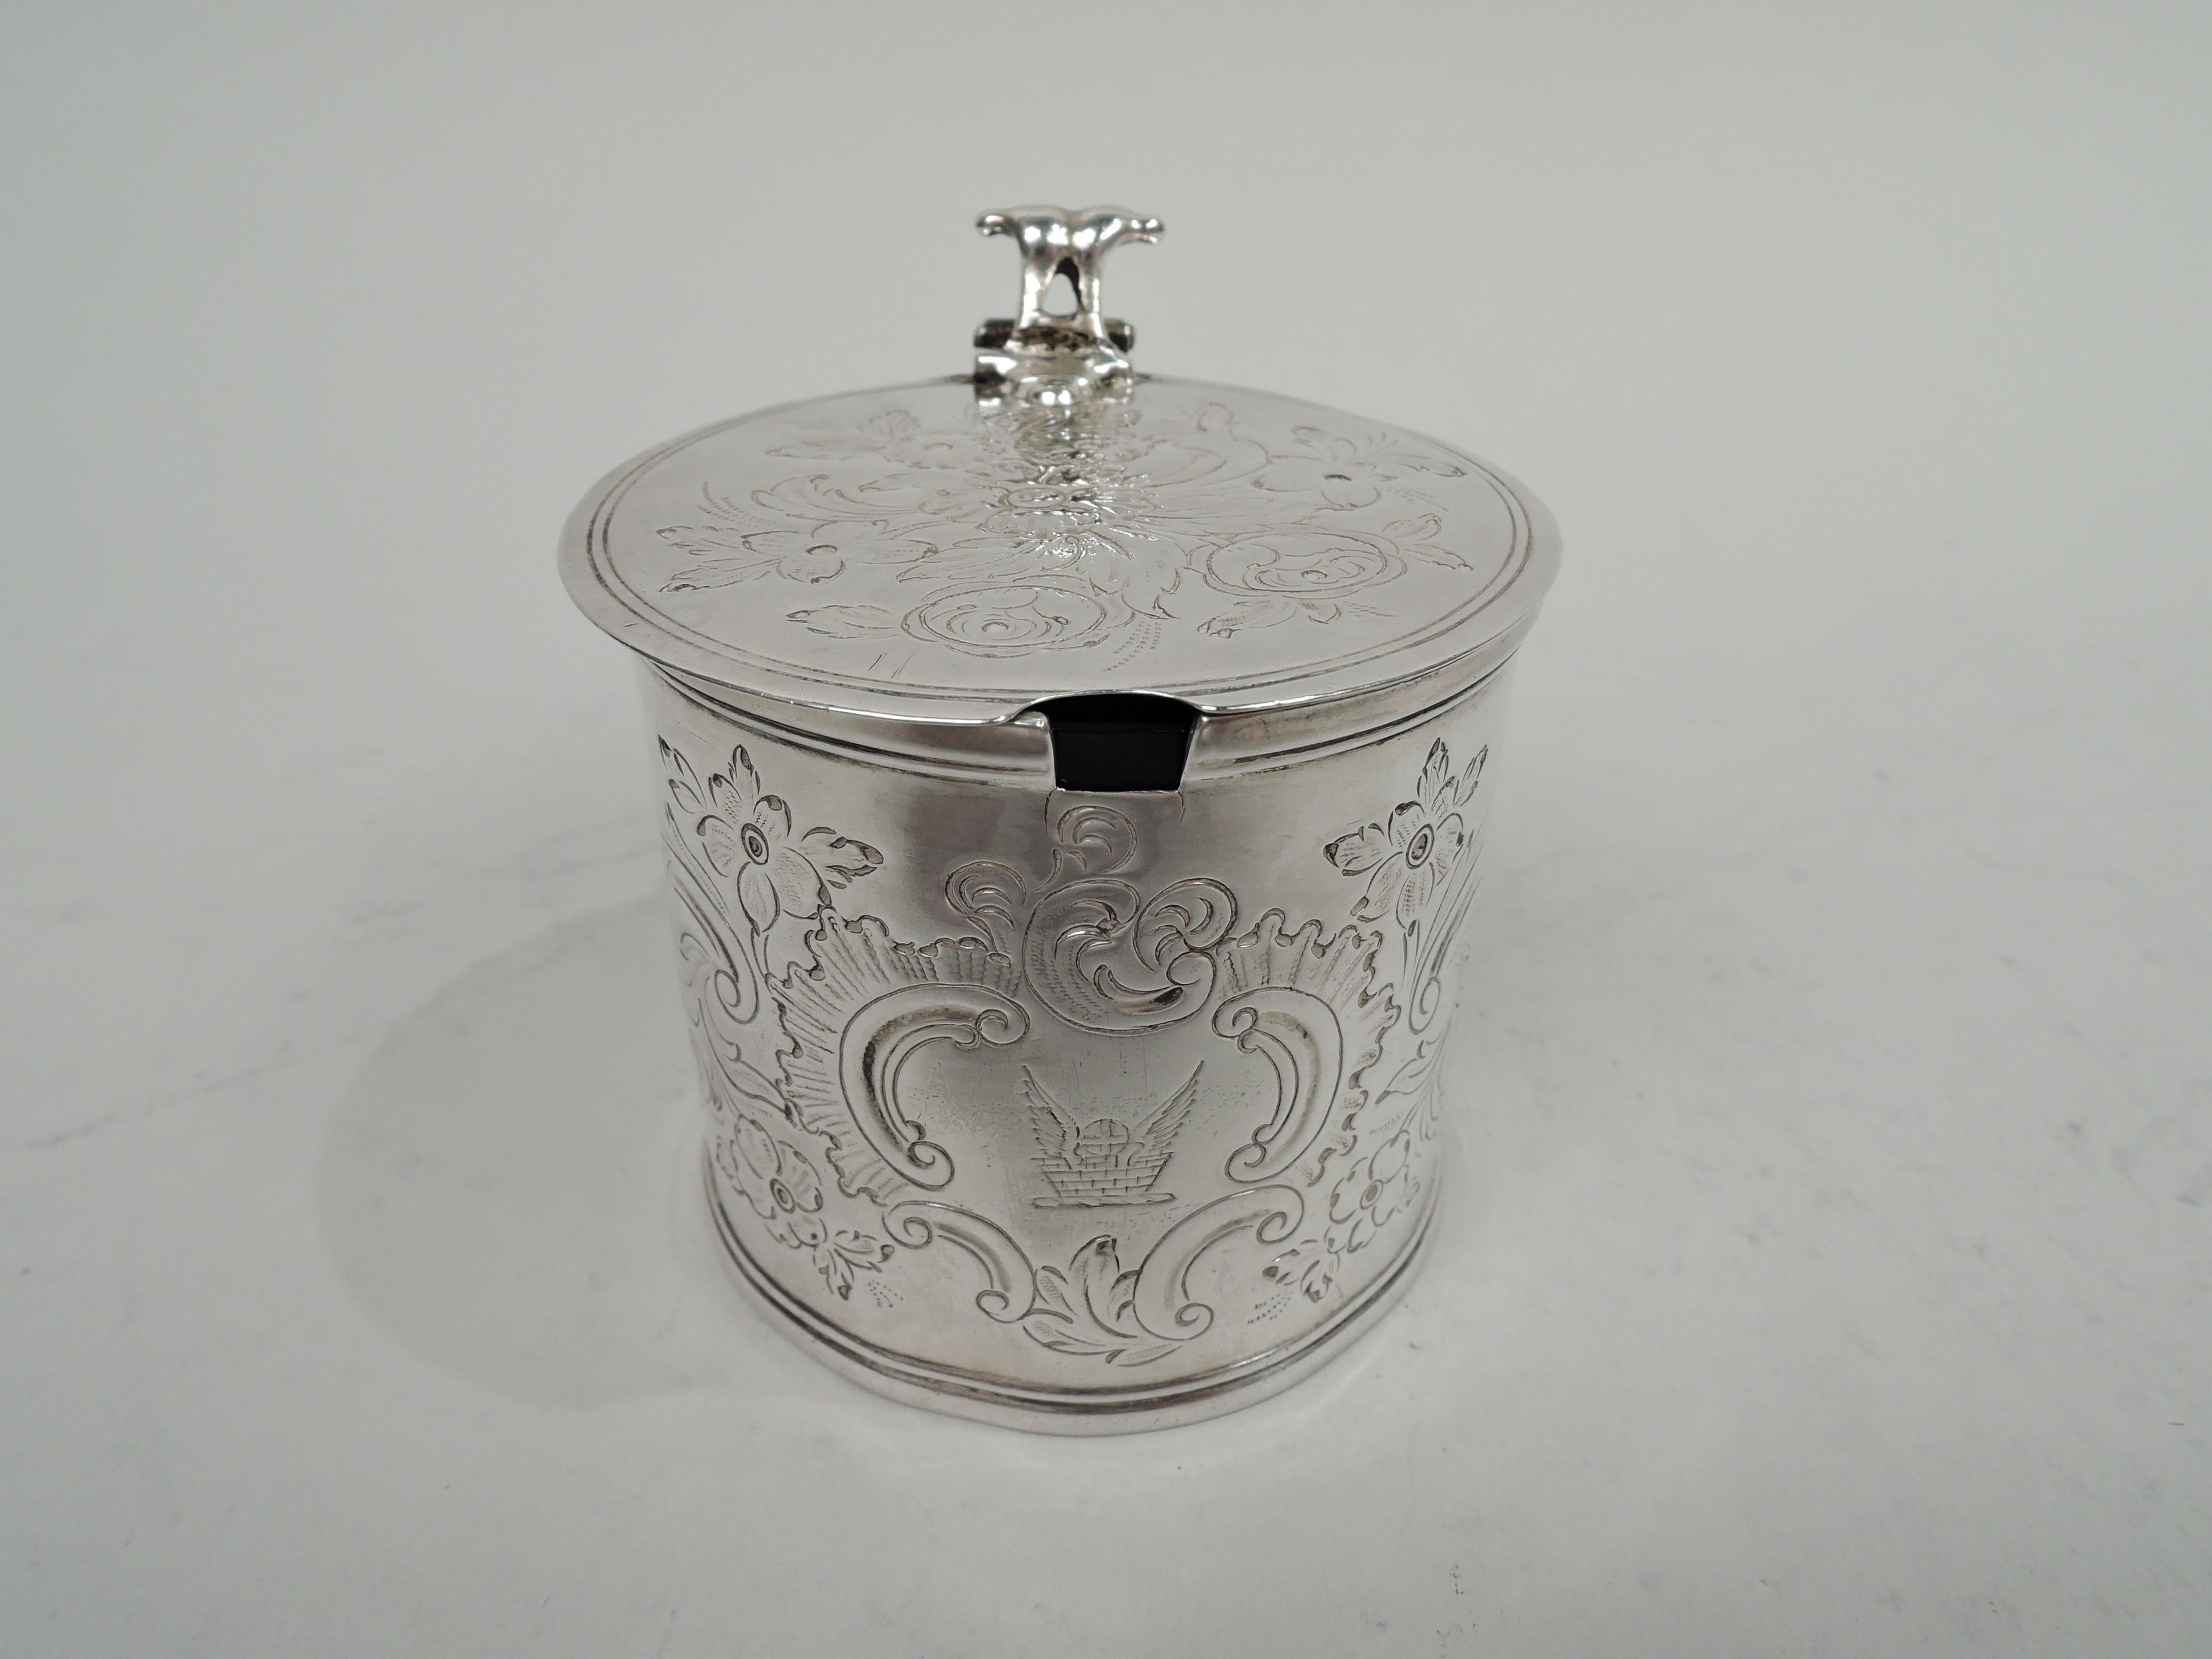 George III sterling silver mustard pot. Made by Andrew Fogelberg in London 1770. Drum-form with flat and hinged cover; leaf-capped s-scroll handle with open scroll thumb rest. Engraved leafing scrollwork, including frame engraved with armorial.